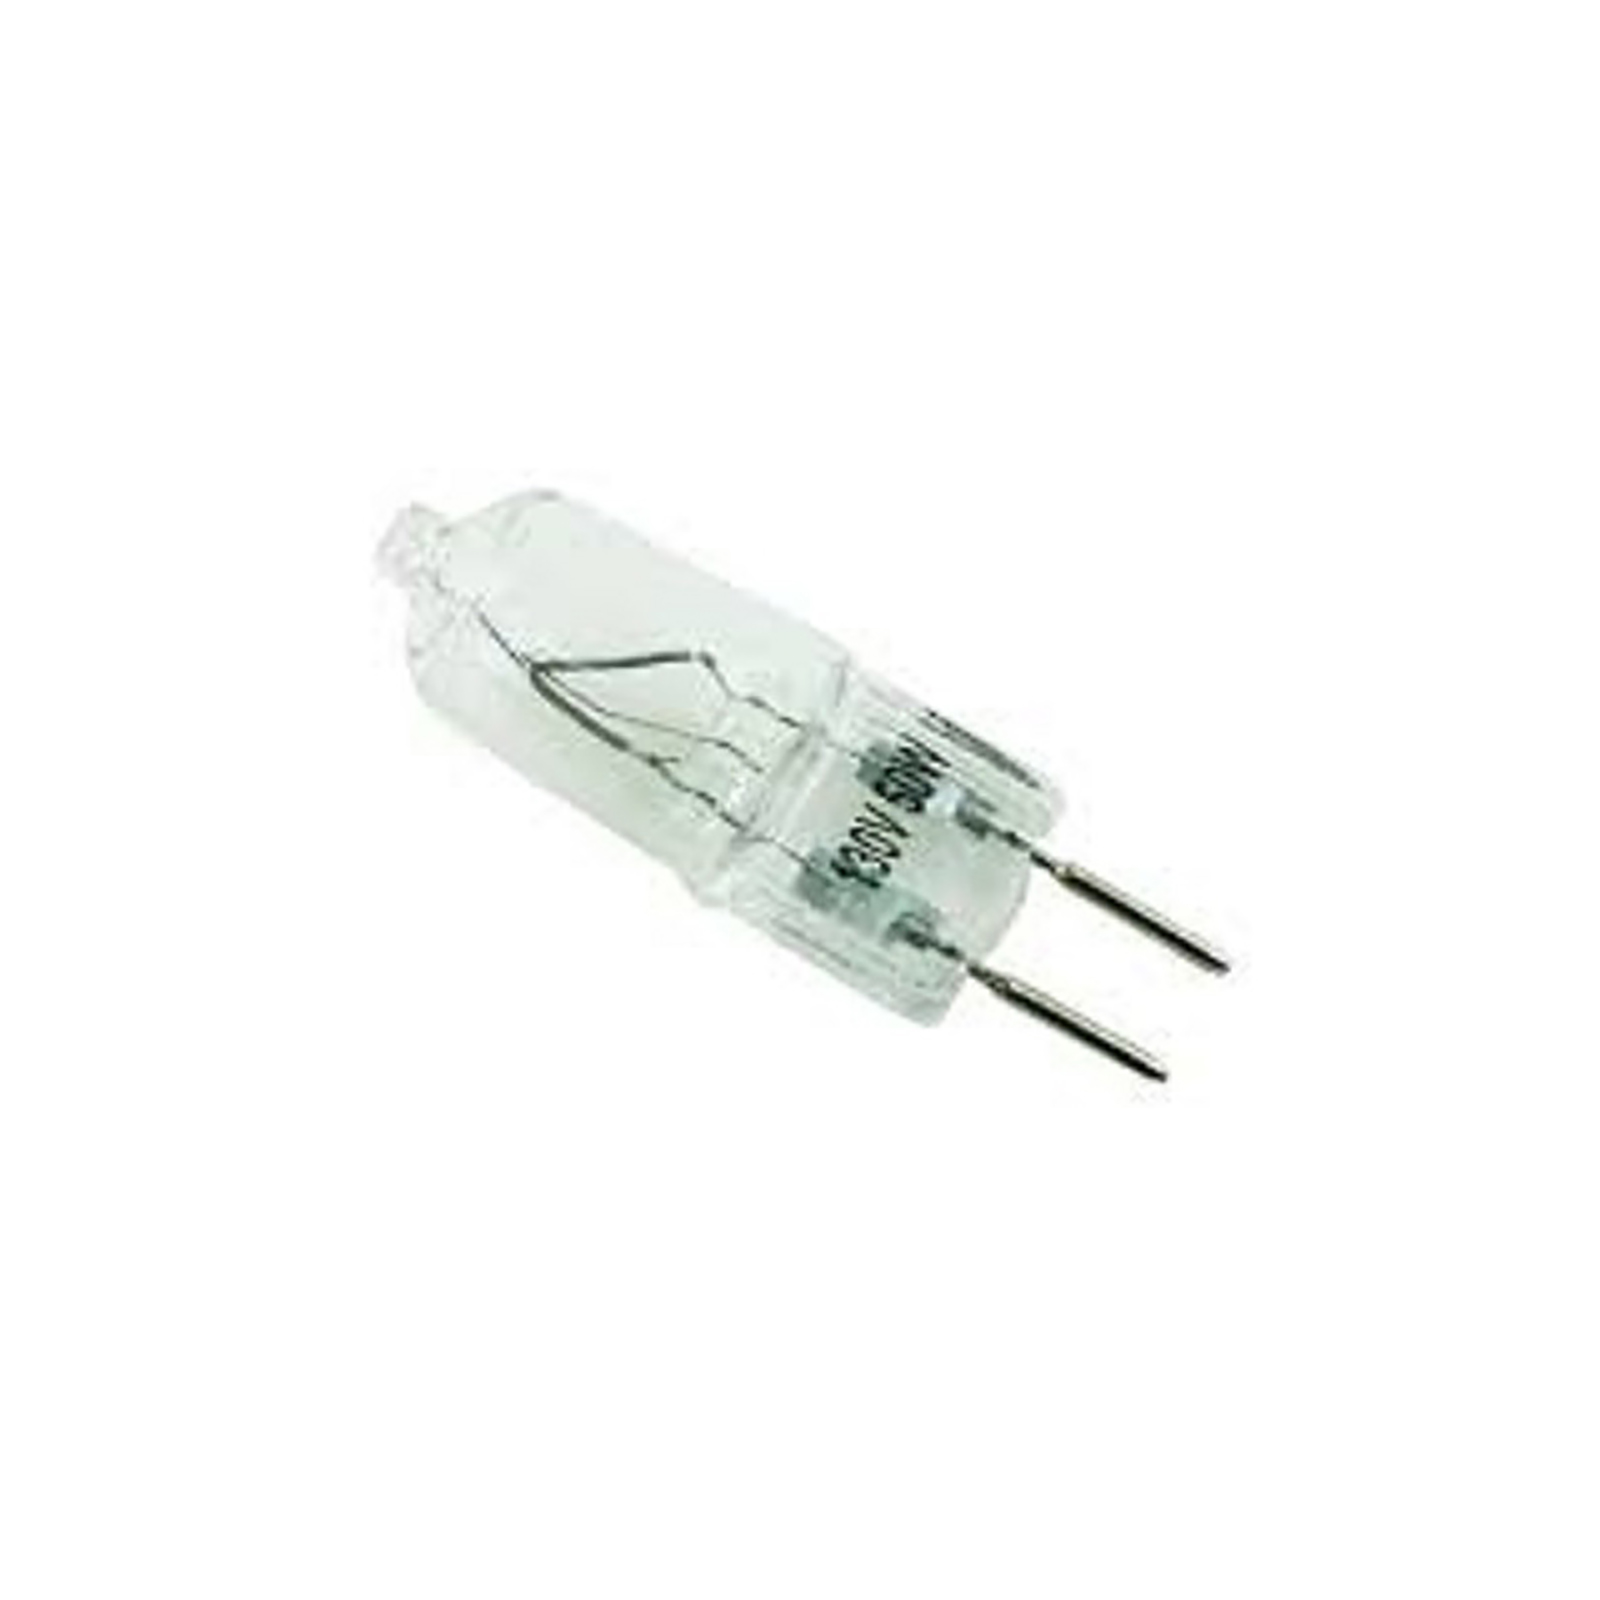 EDGEWATER PARTS WB08X10050 Halogen Bulb for GE Microwaves